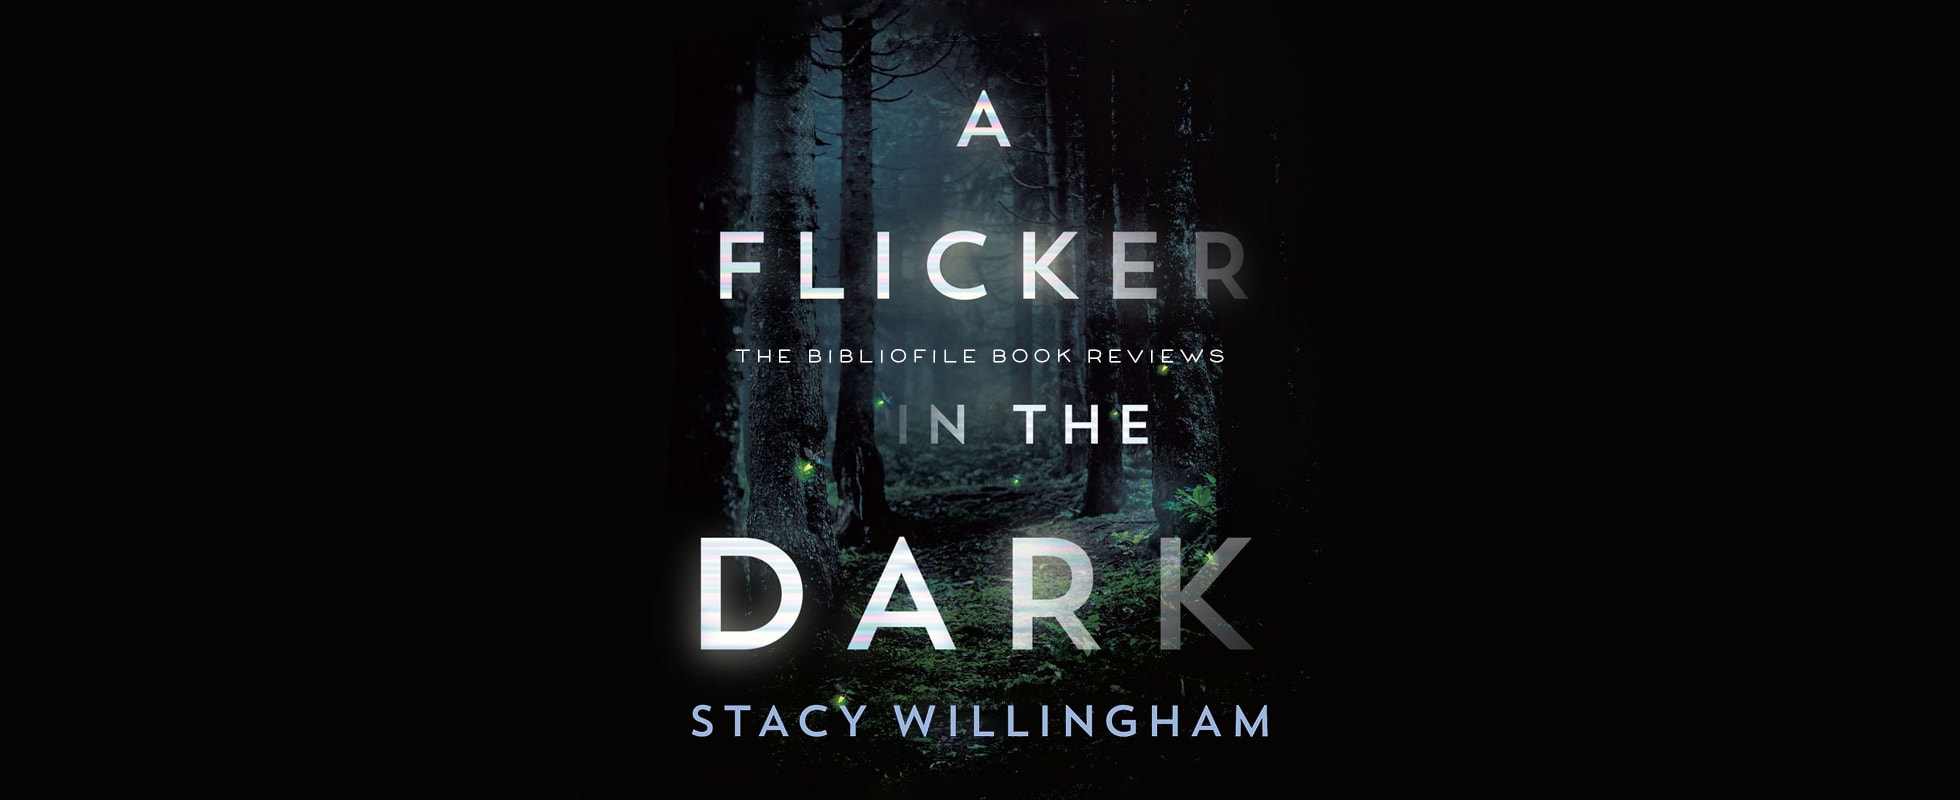 a flicker in the dark by stacy willingham book review plot summary synopsis recap discussion spoilers